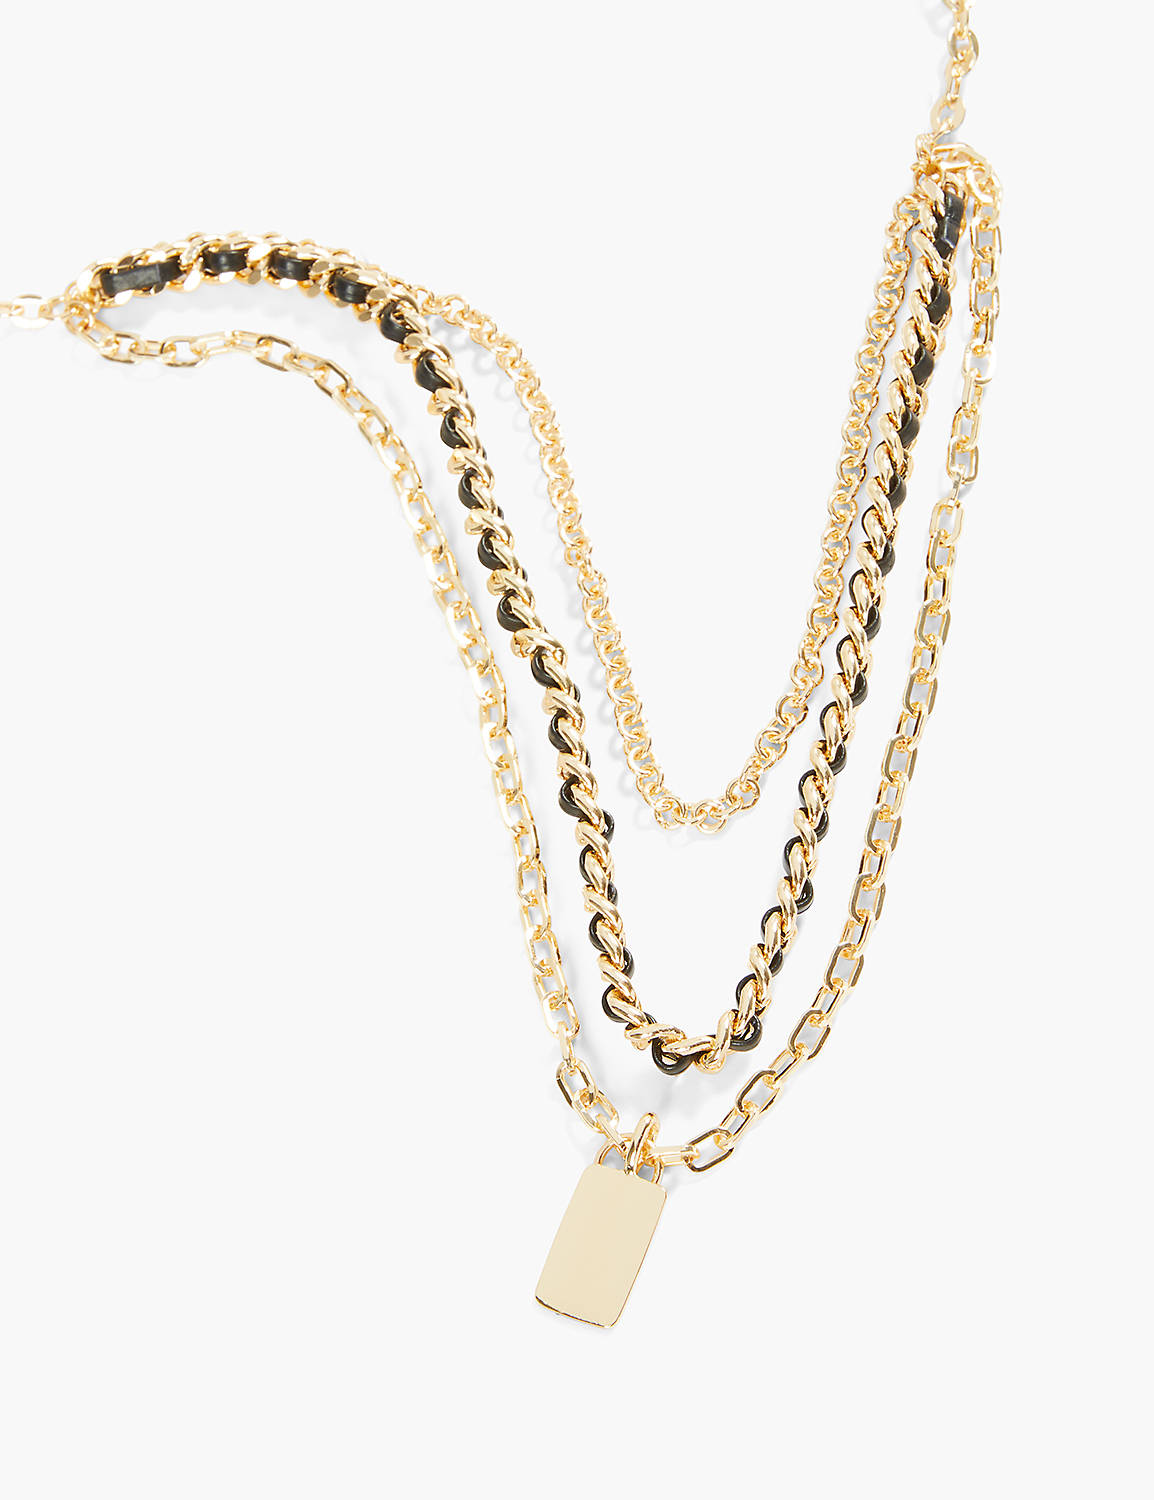 MS LINK CHAIN NECKLACE:Gold Tone:ONESZ Product Image 1